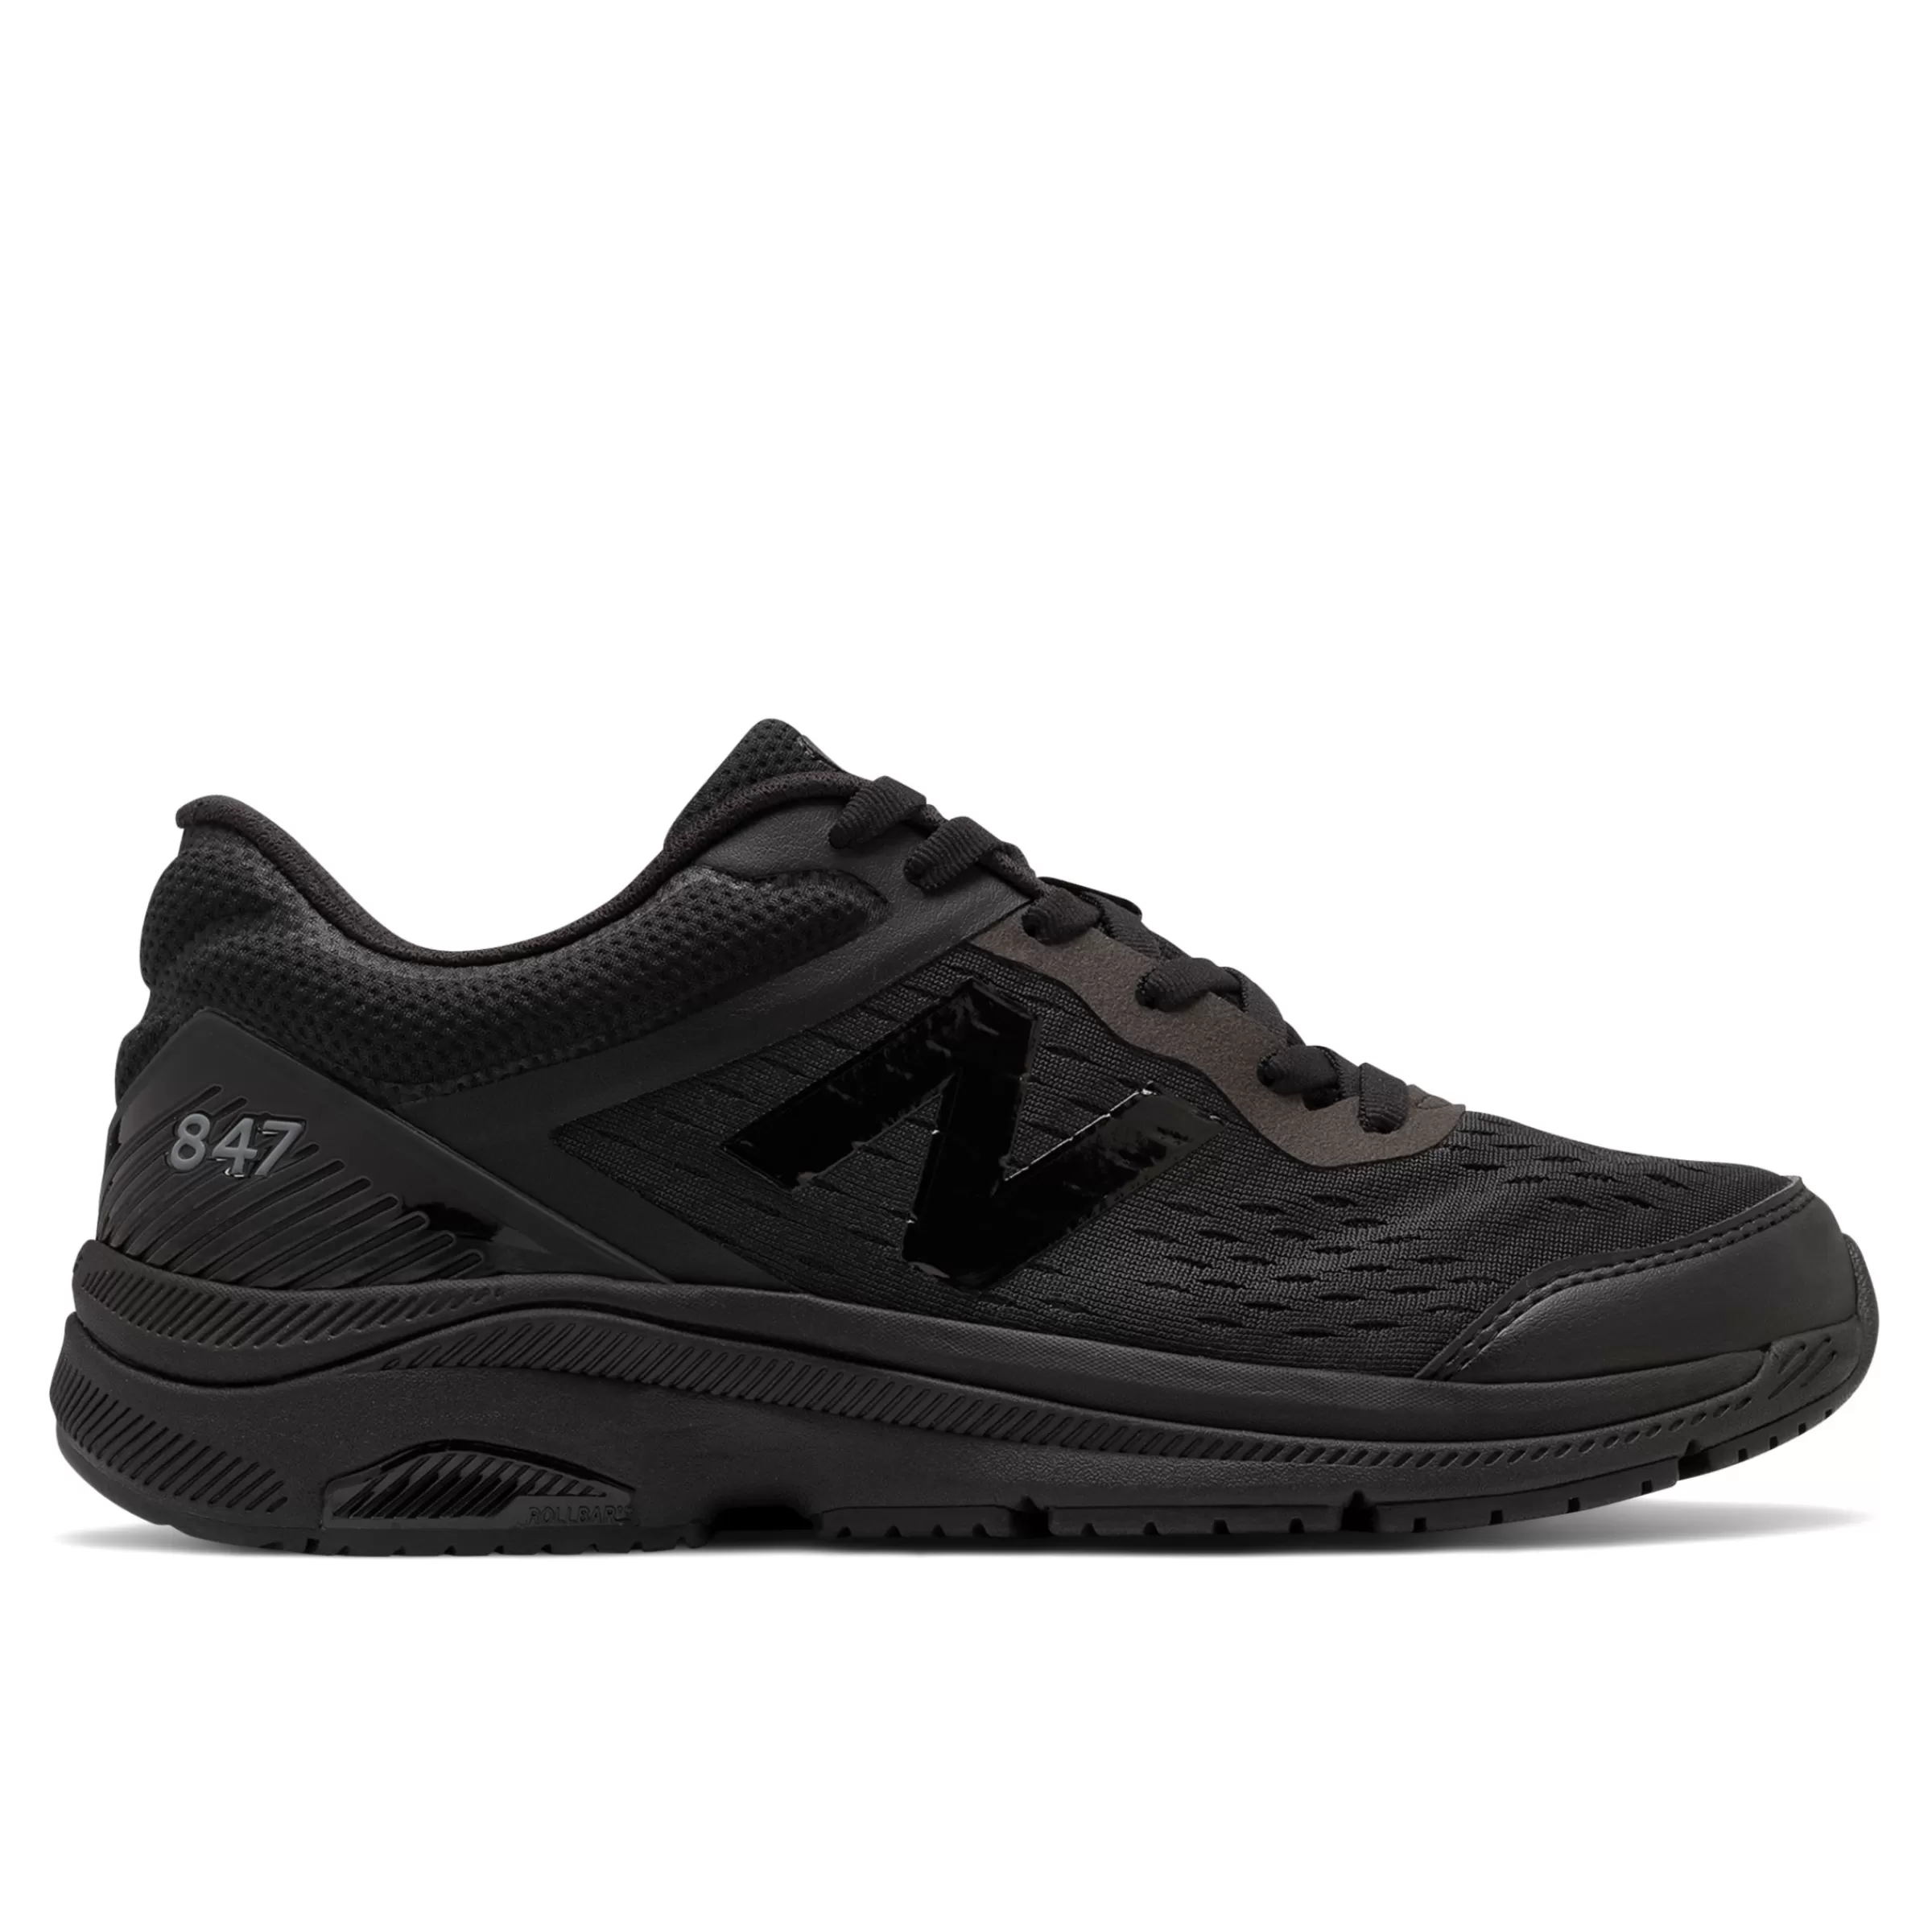 New Balance Chaussures | Grandes tailles-847v4 Black